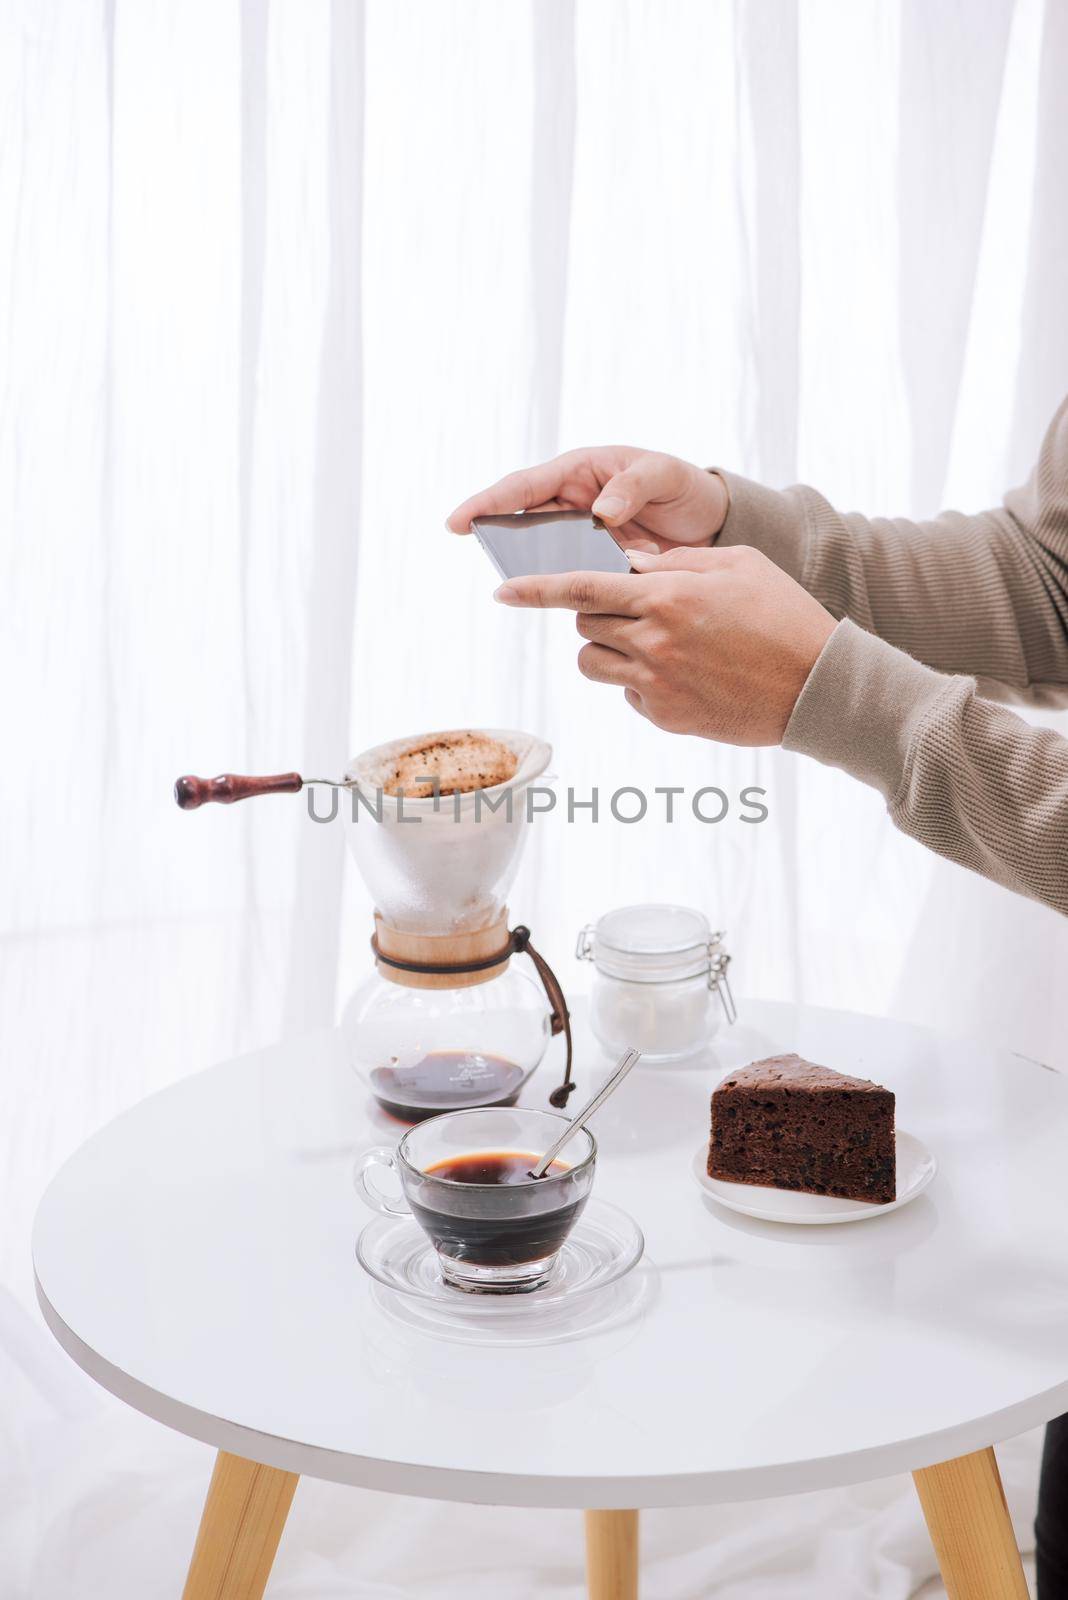 Handsome asian taking photo of chocolate cake and milk at coffee shop. Dessert or food photography hobby. Smartphone or mobile phone photography habit concept.  by makidotvn